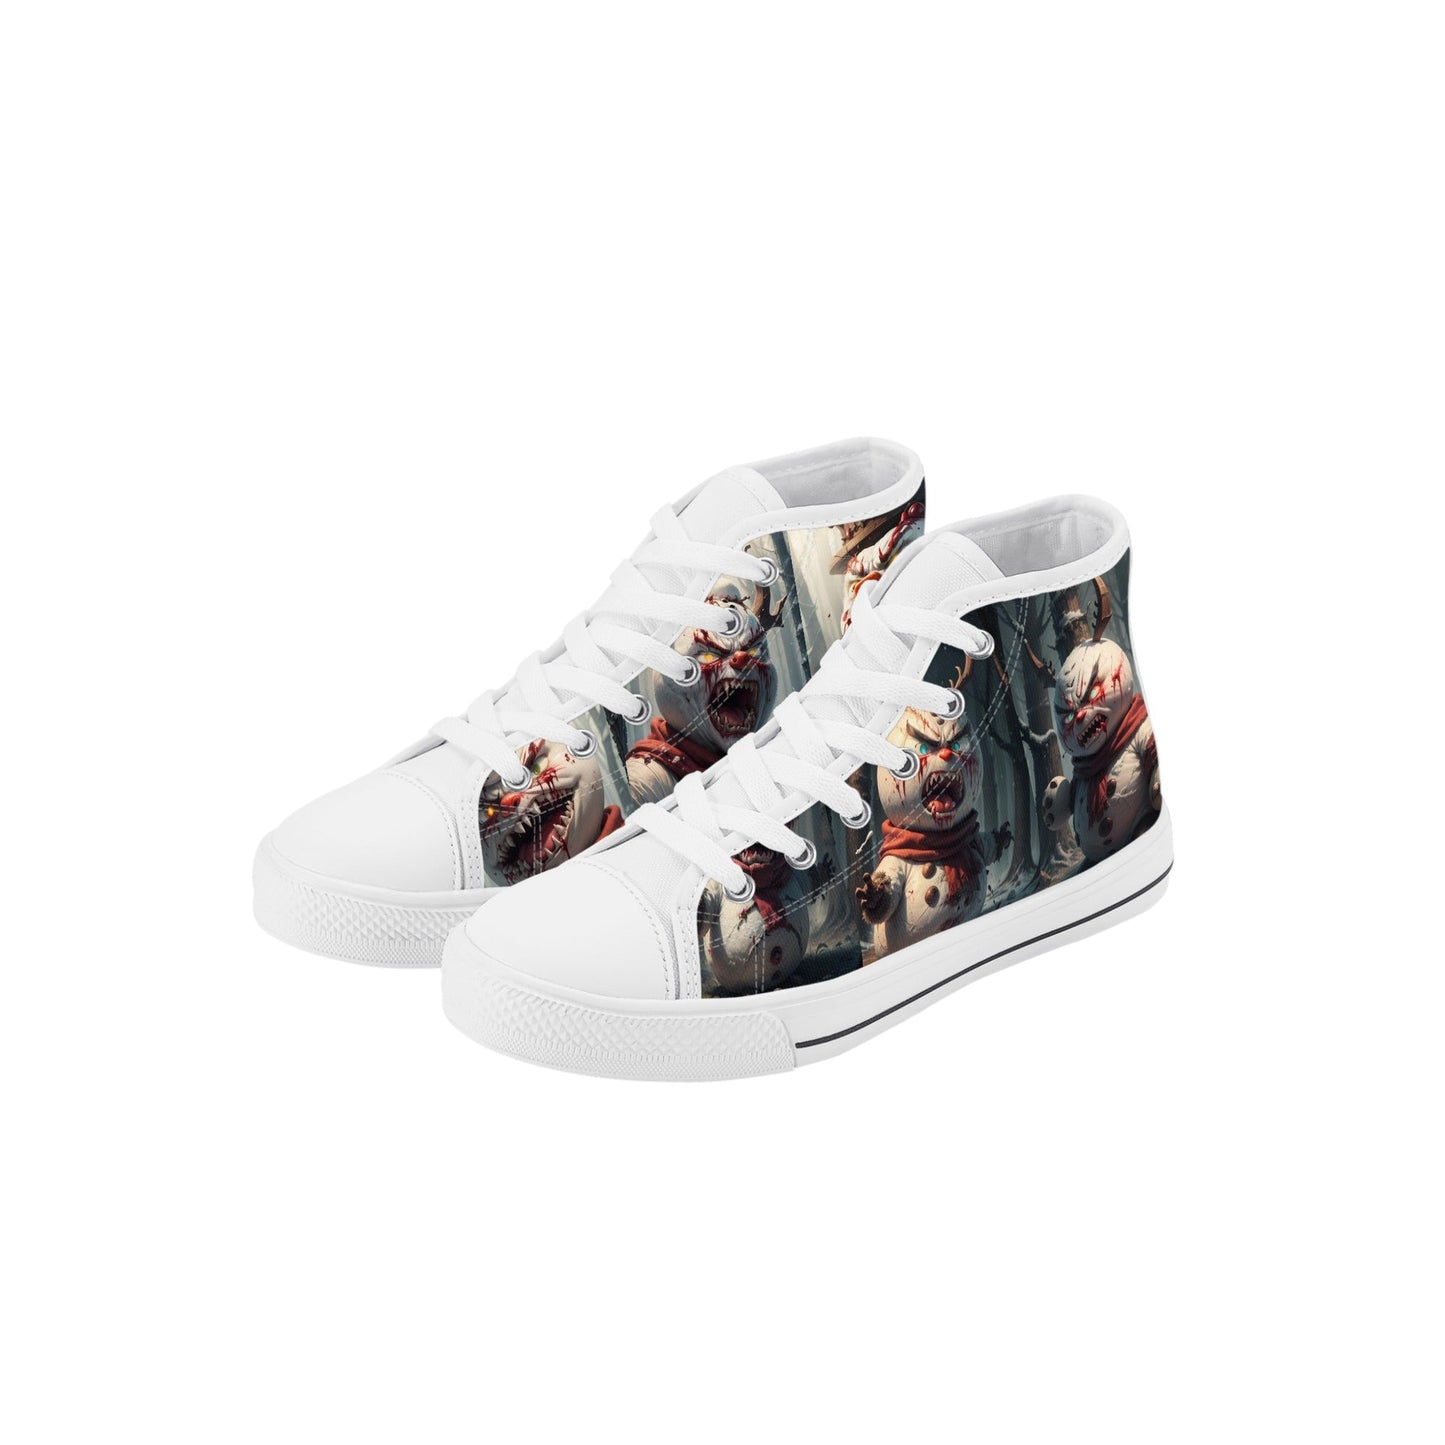 Stand out  with the  Frostys revenge Kids High Top Canvas Shoes  available at Hey Nugget. Grab yours today!